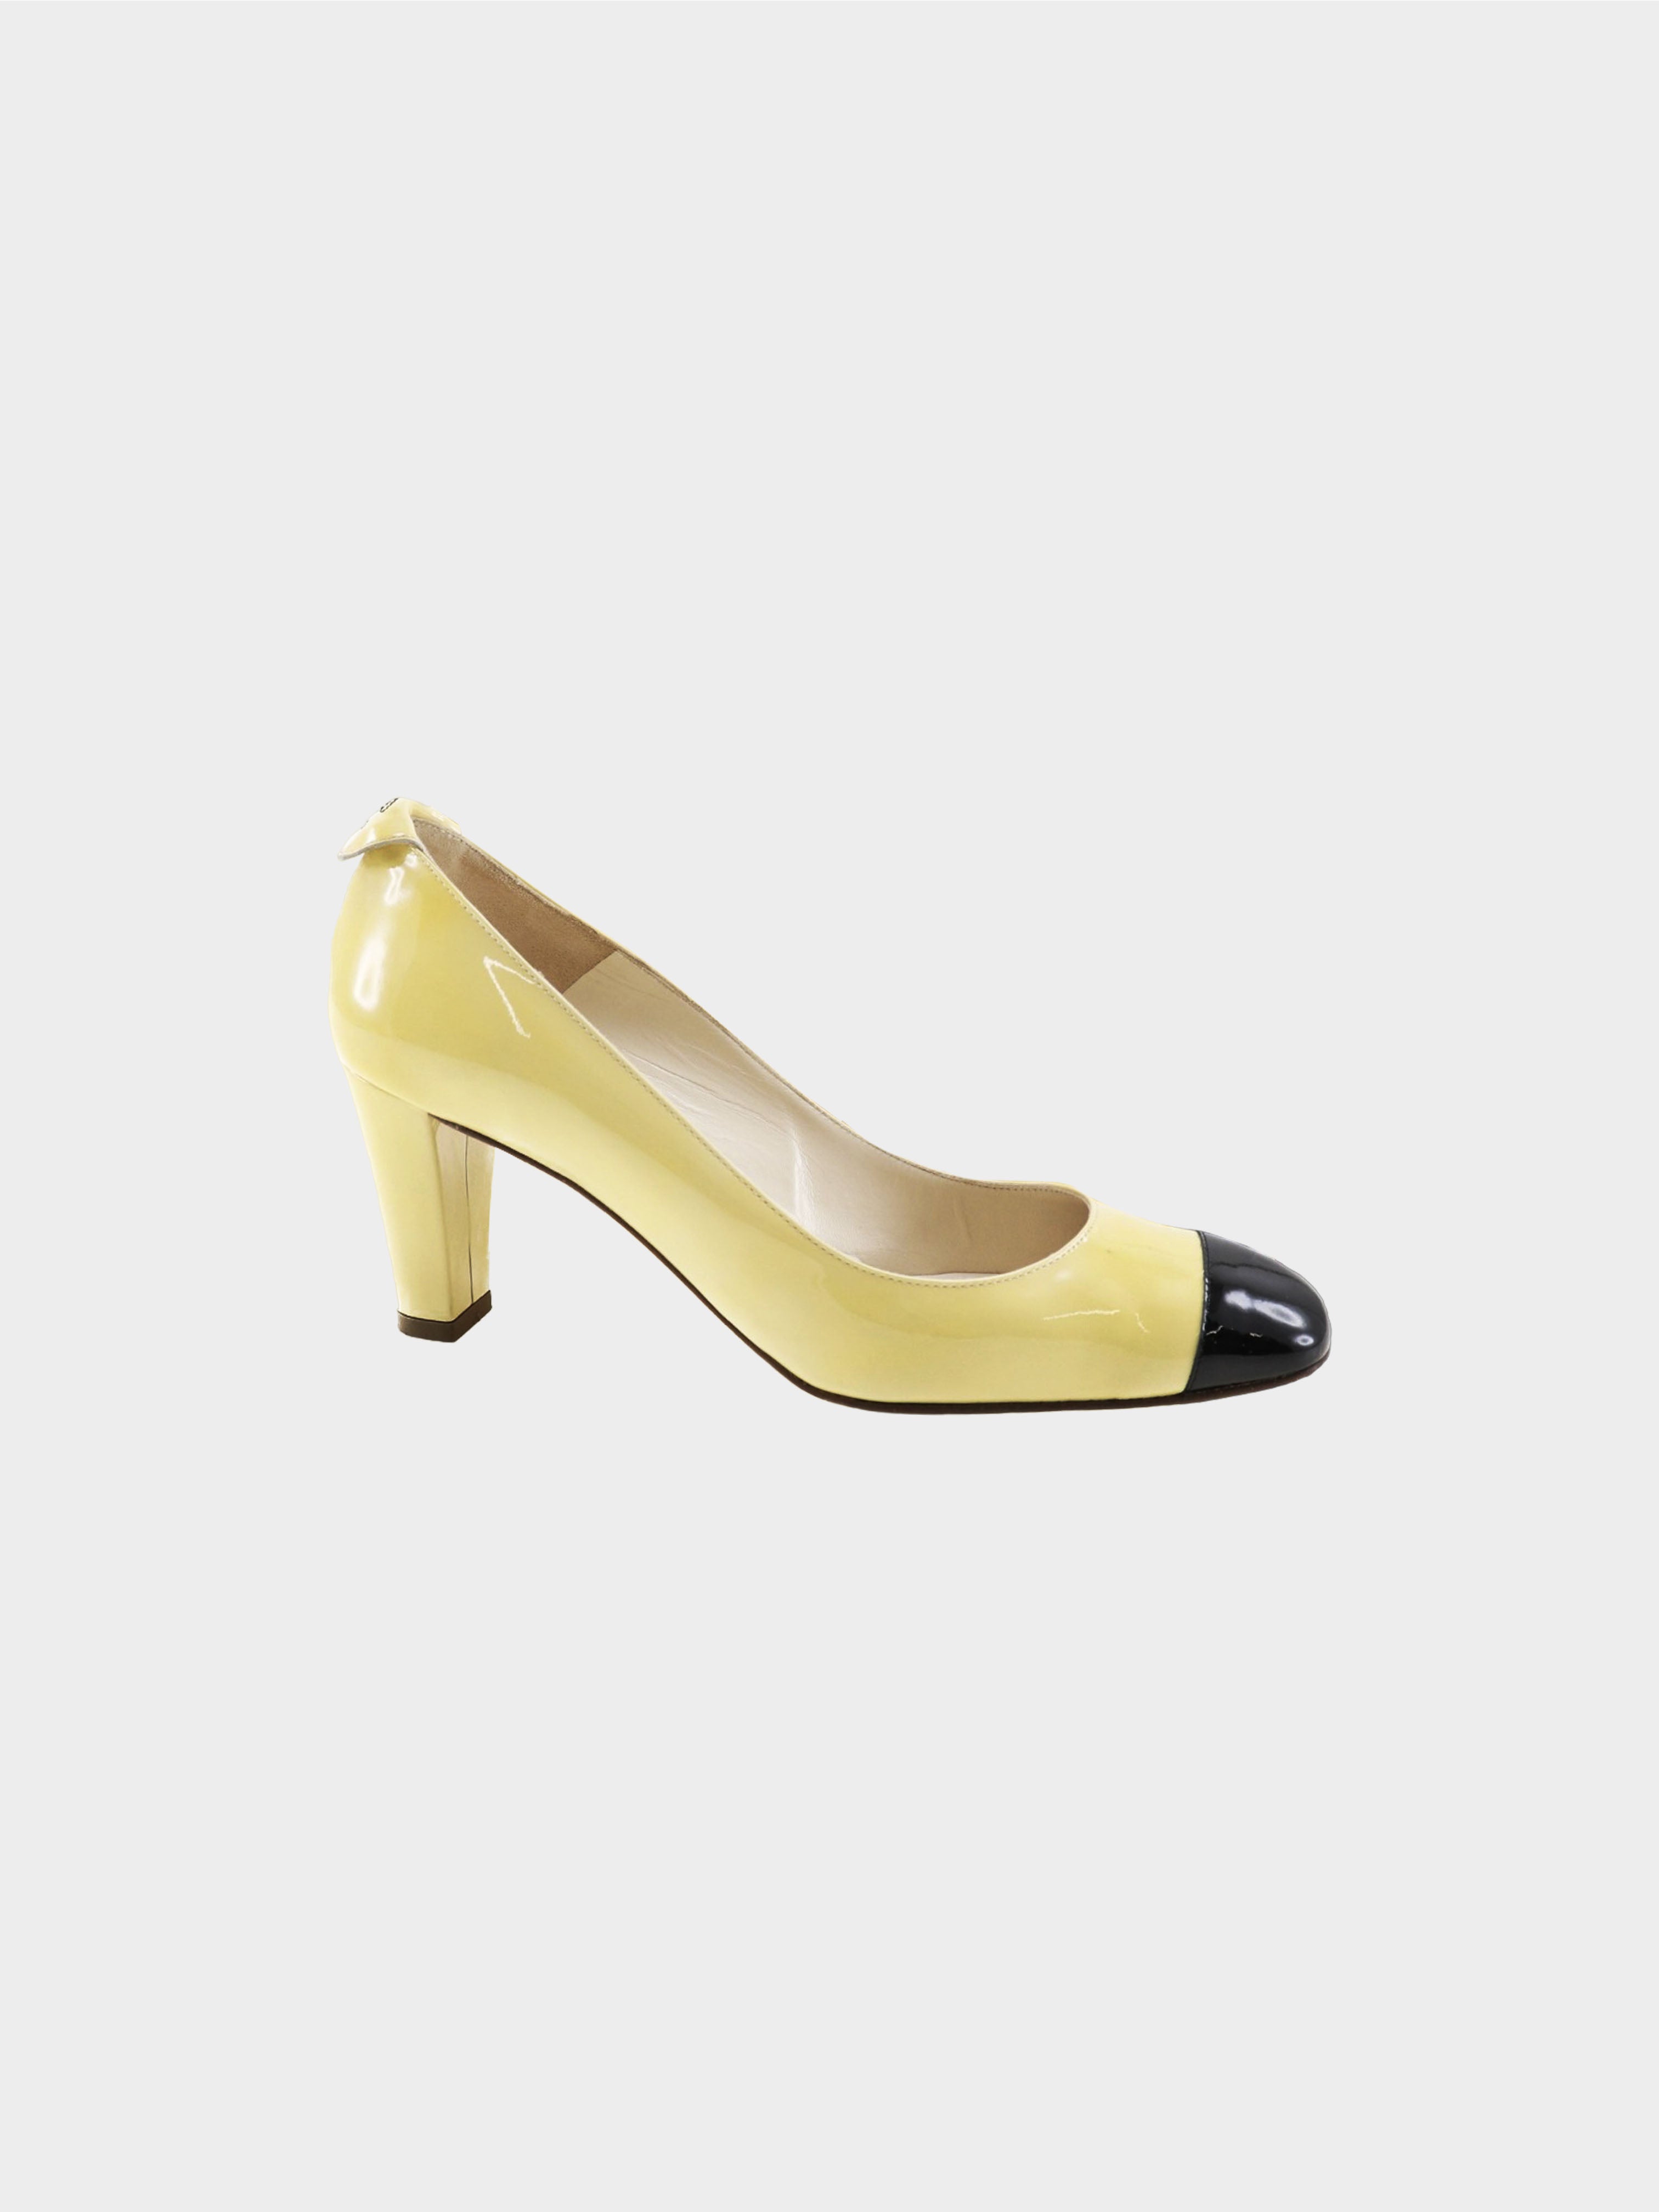 Chanel 2000s Black and Beige Two-toned Pumps